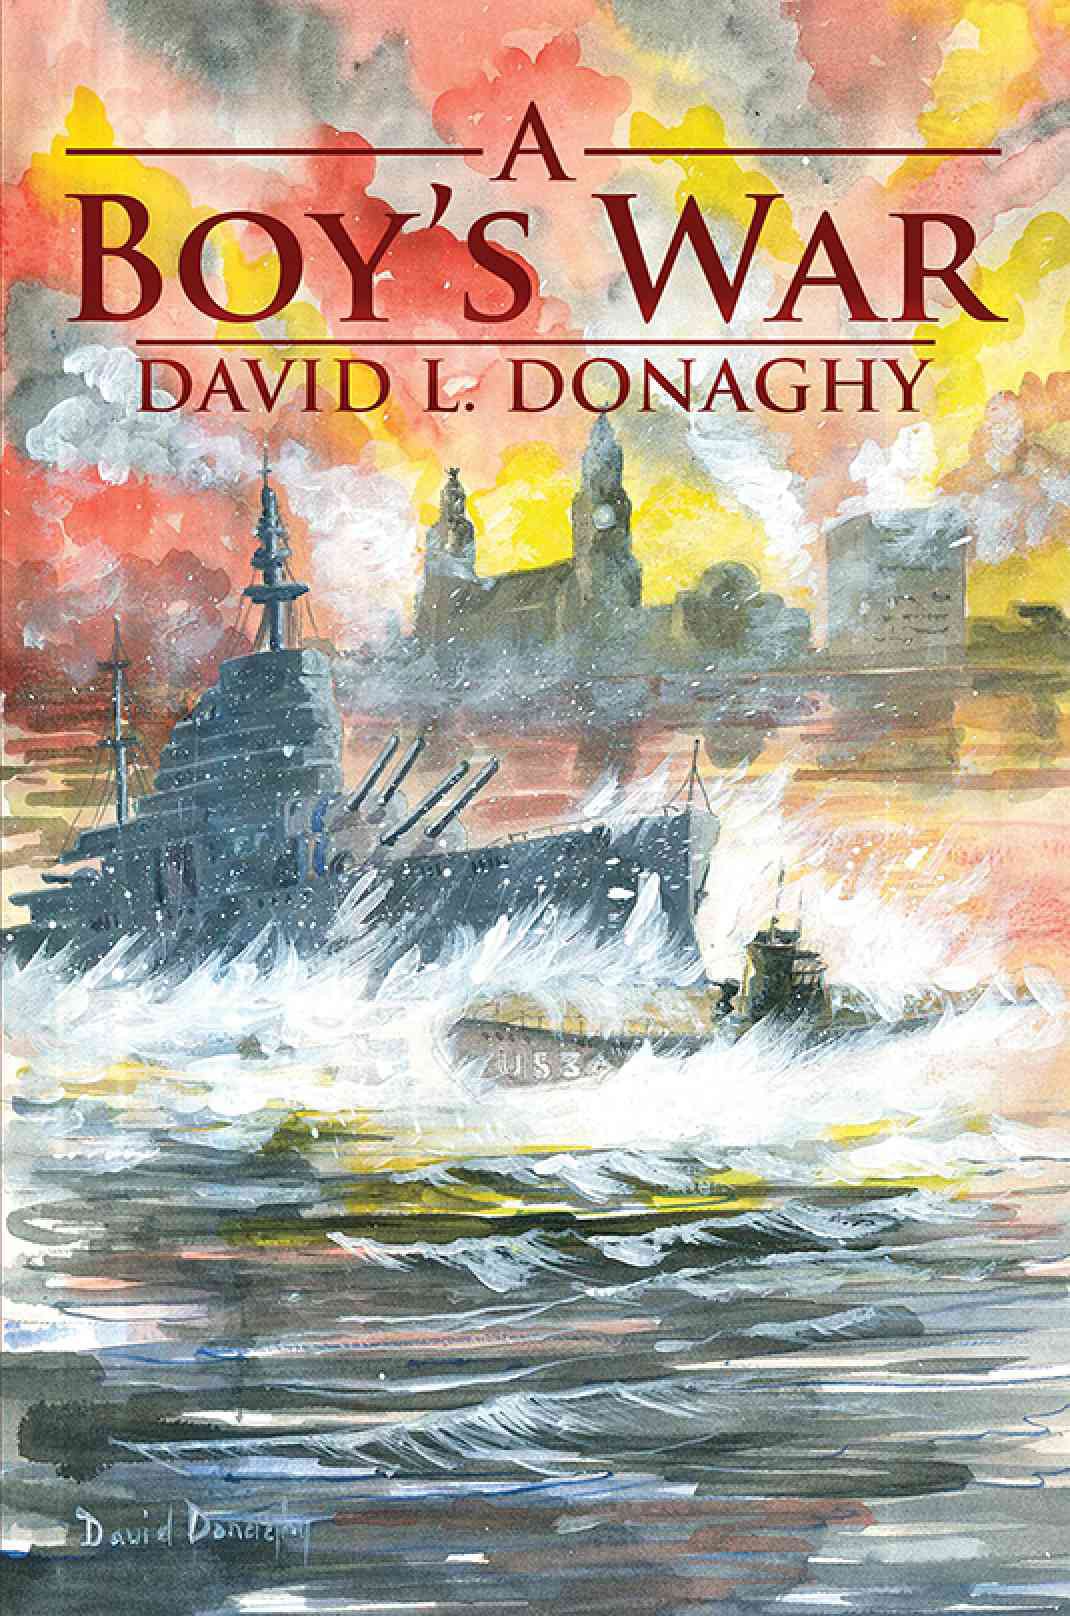 ‘A Boy's War’ by David L. Donaghy Announced as a Giveaway in an Online Competition